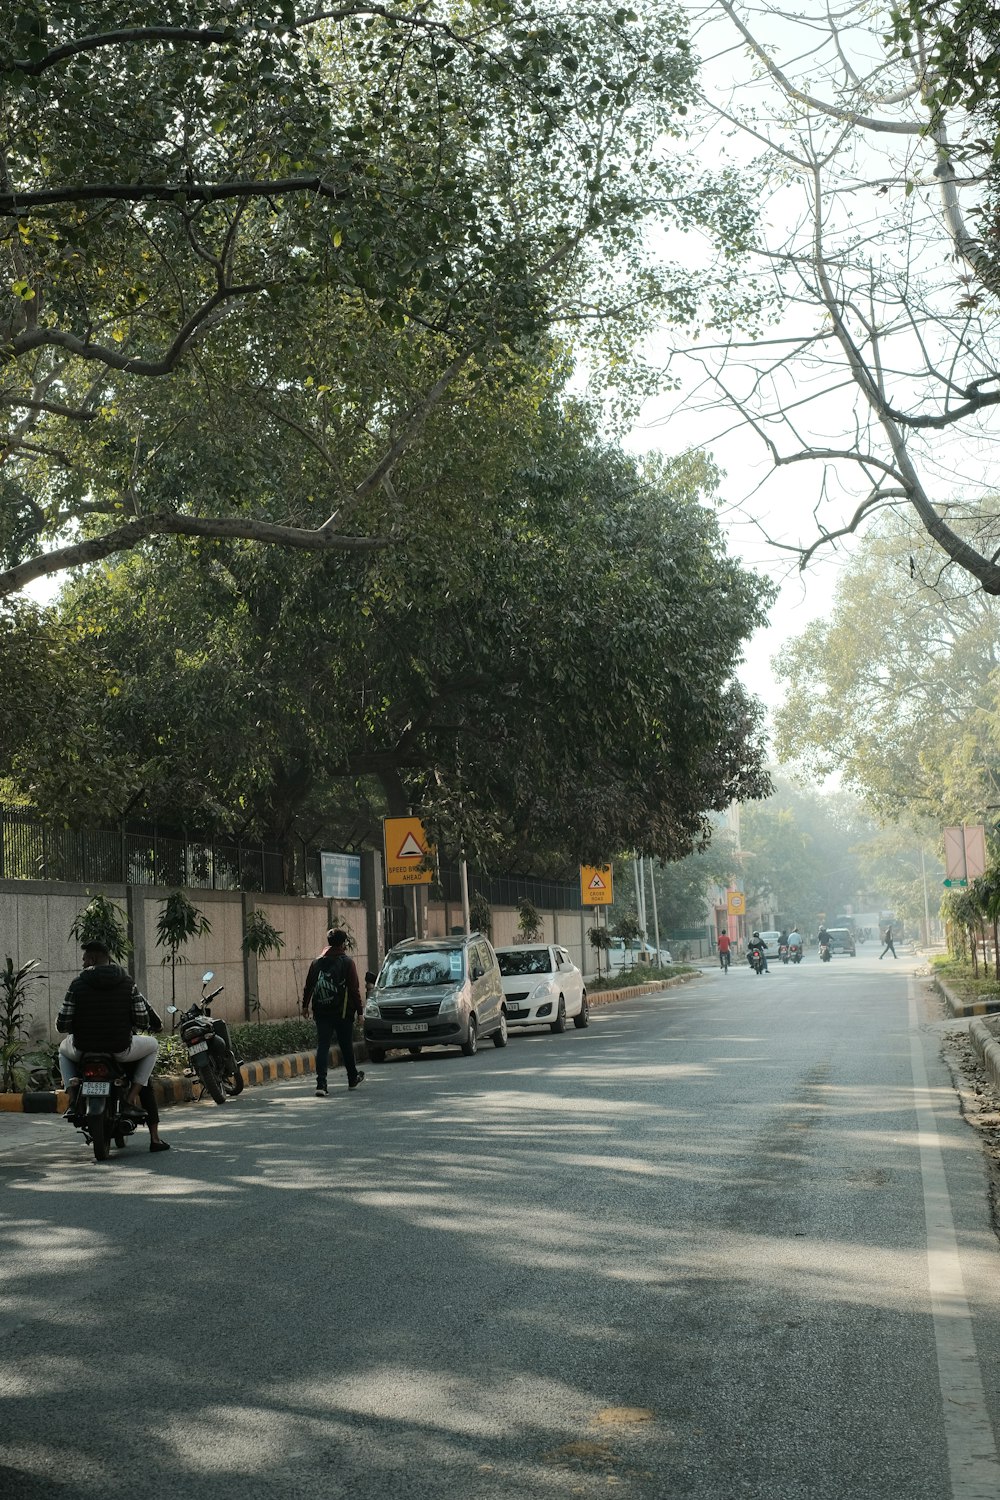 a man riding a motorcycle down a tree lined street